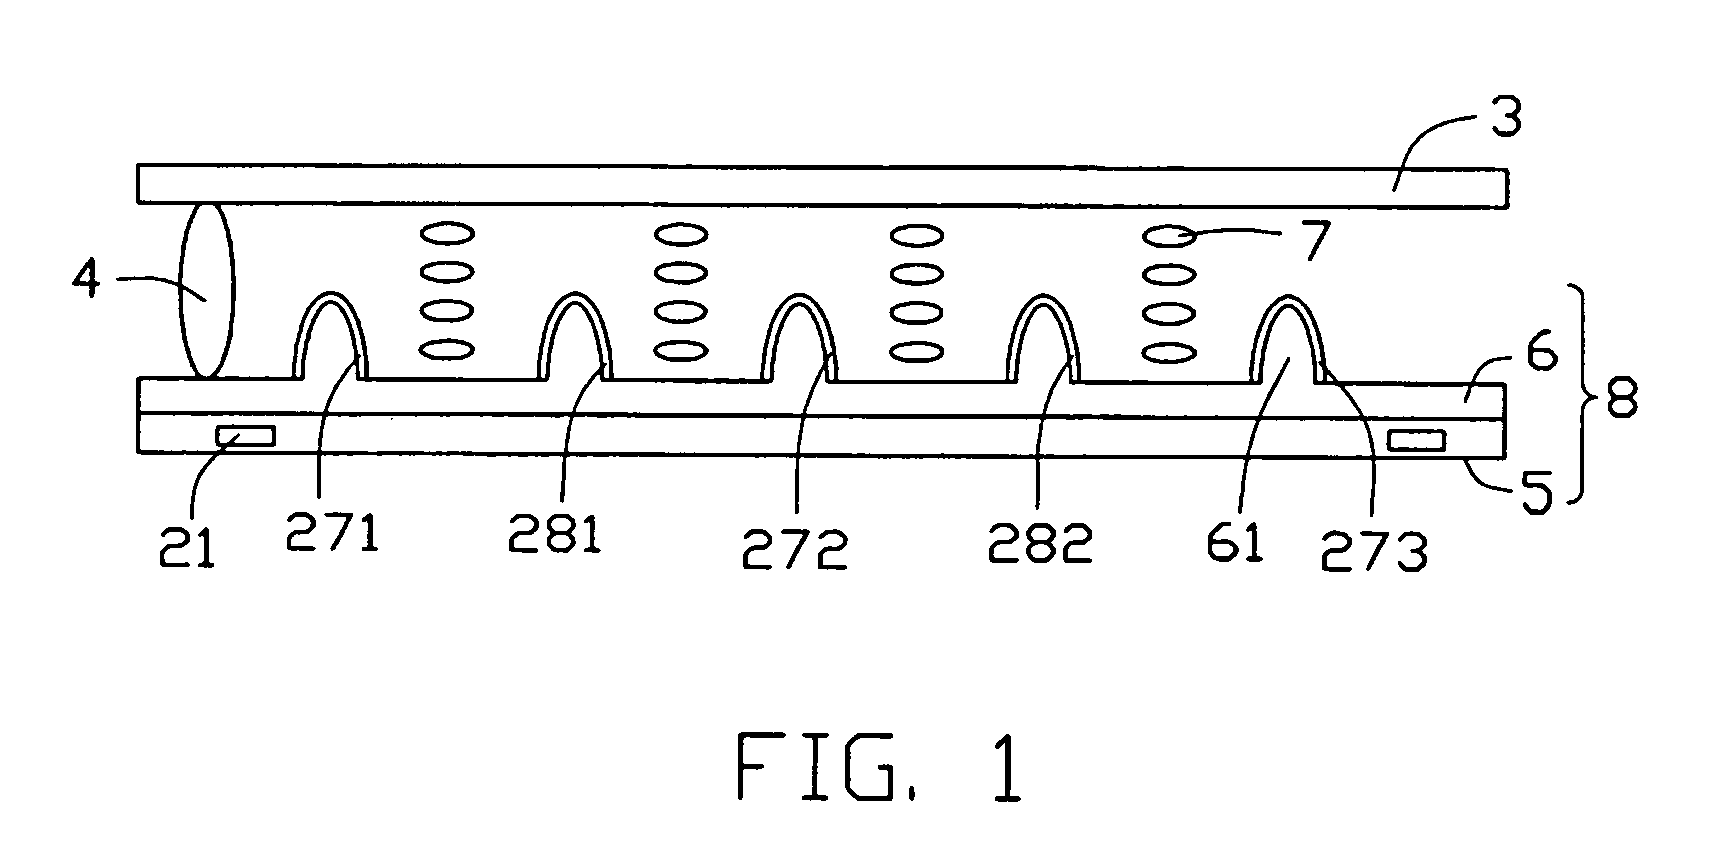 IPS type liquid crystal display with protrusive electrodes